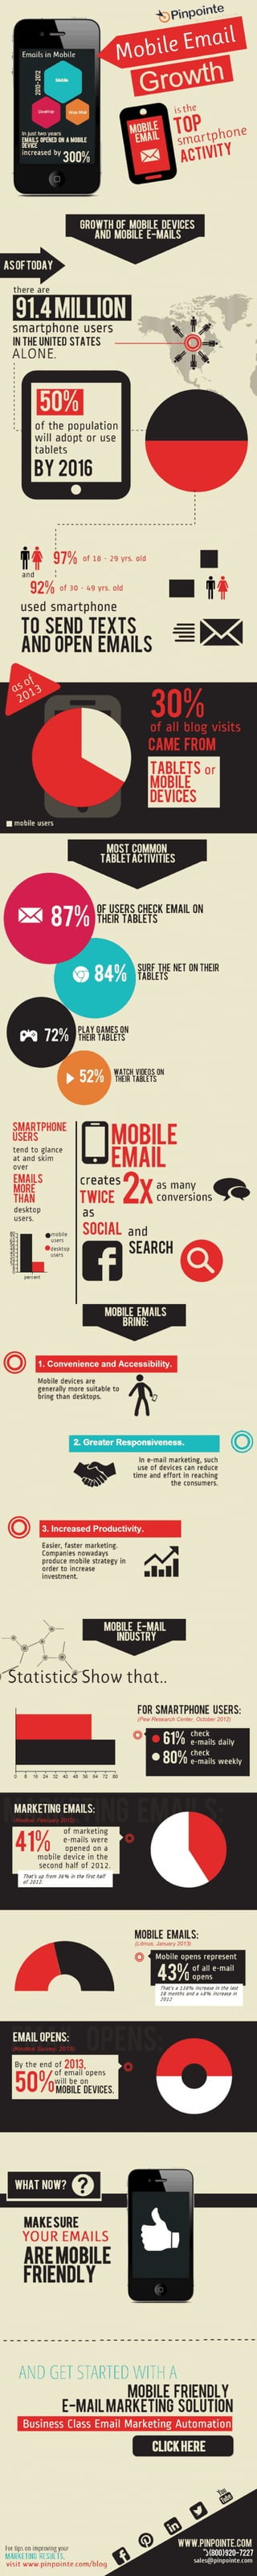 Mobile email-marketing-statistics-infographic-pinpointe